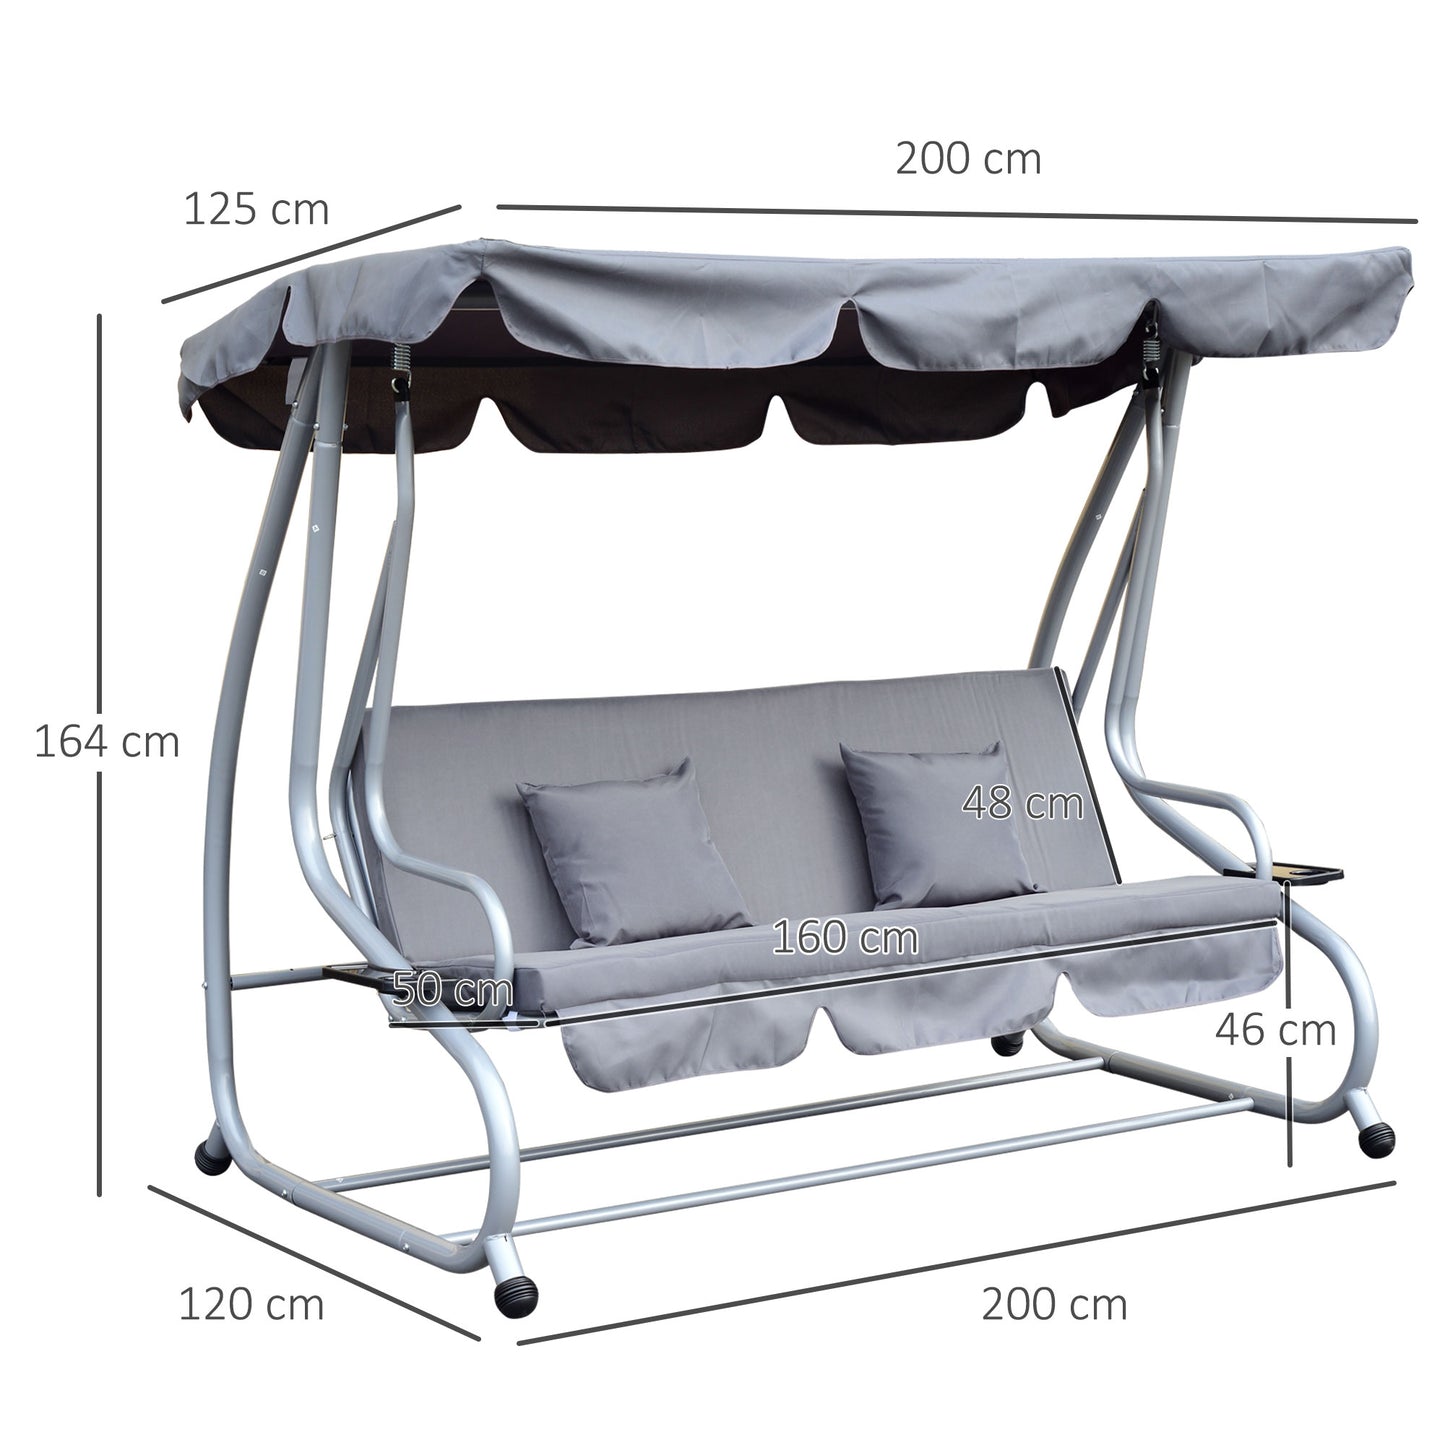 Outsunny 2-in-1 Garden Swing Seat Bed 3 Seater Swing Chair Hammock Bench Bed with Tilting Canopy and 2 Cushions, Grey